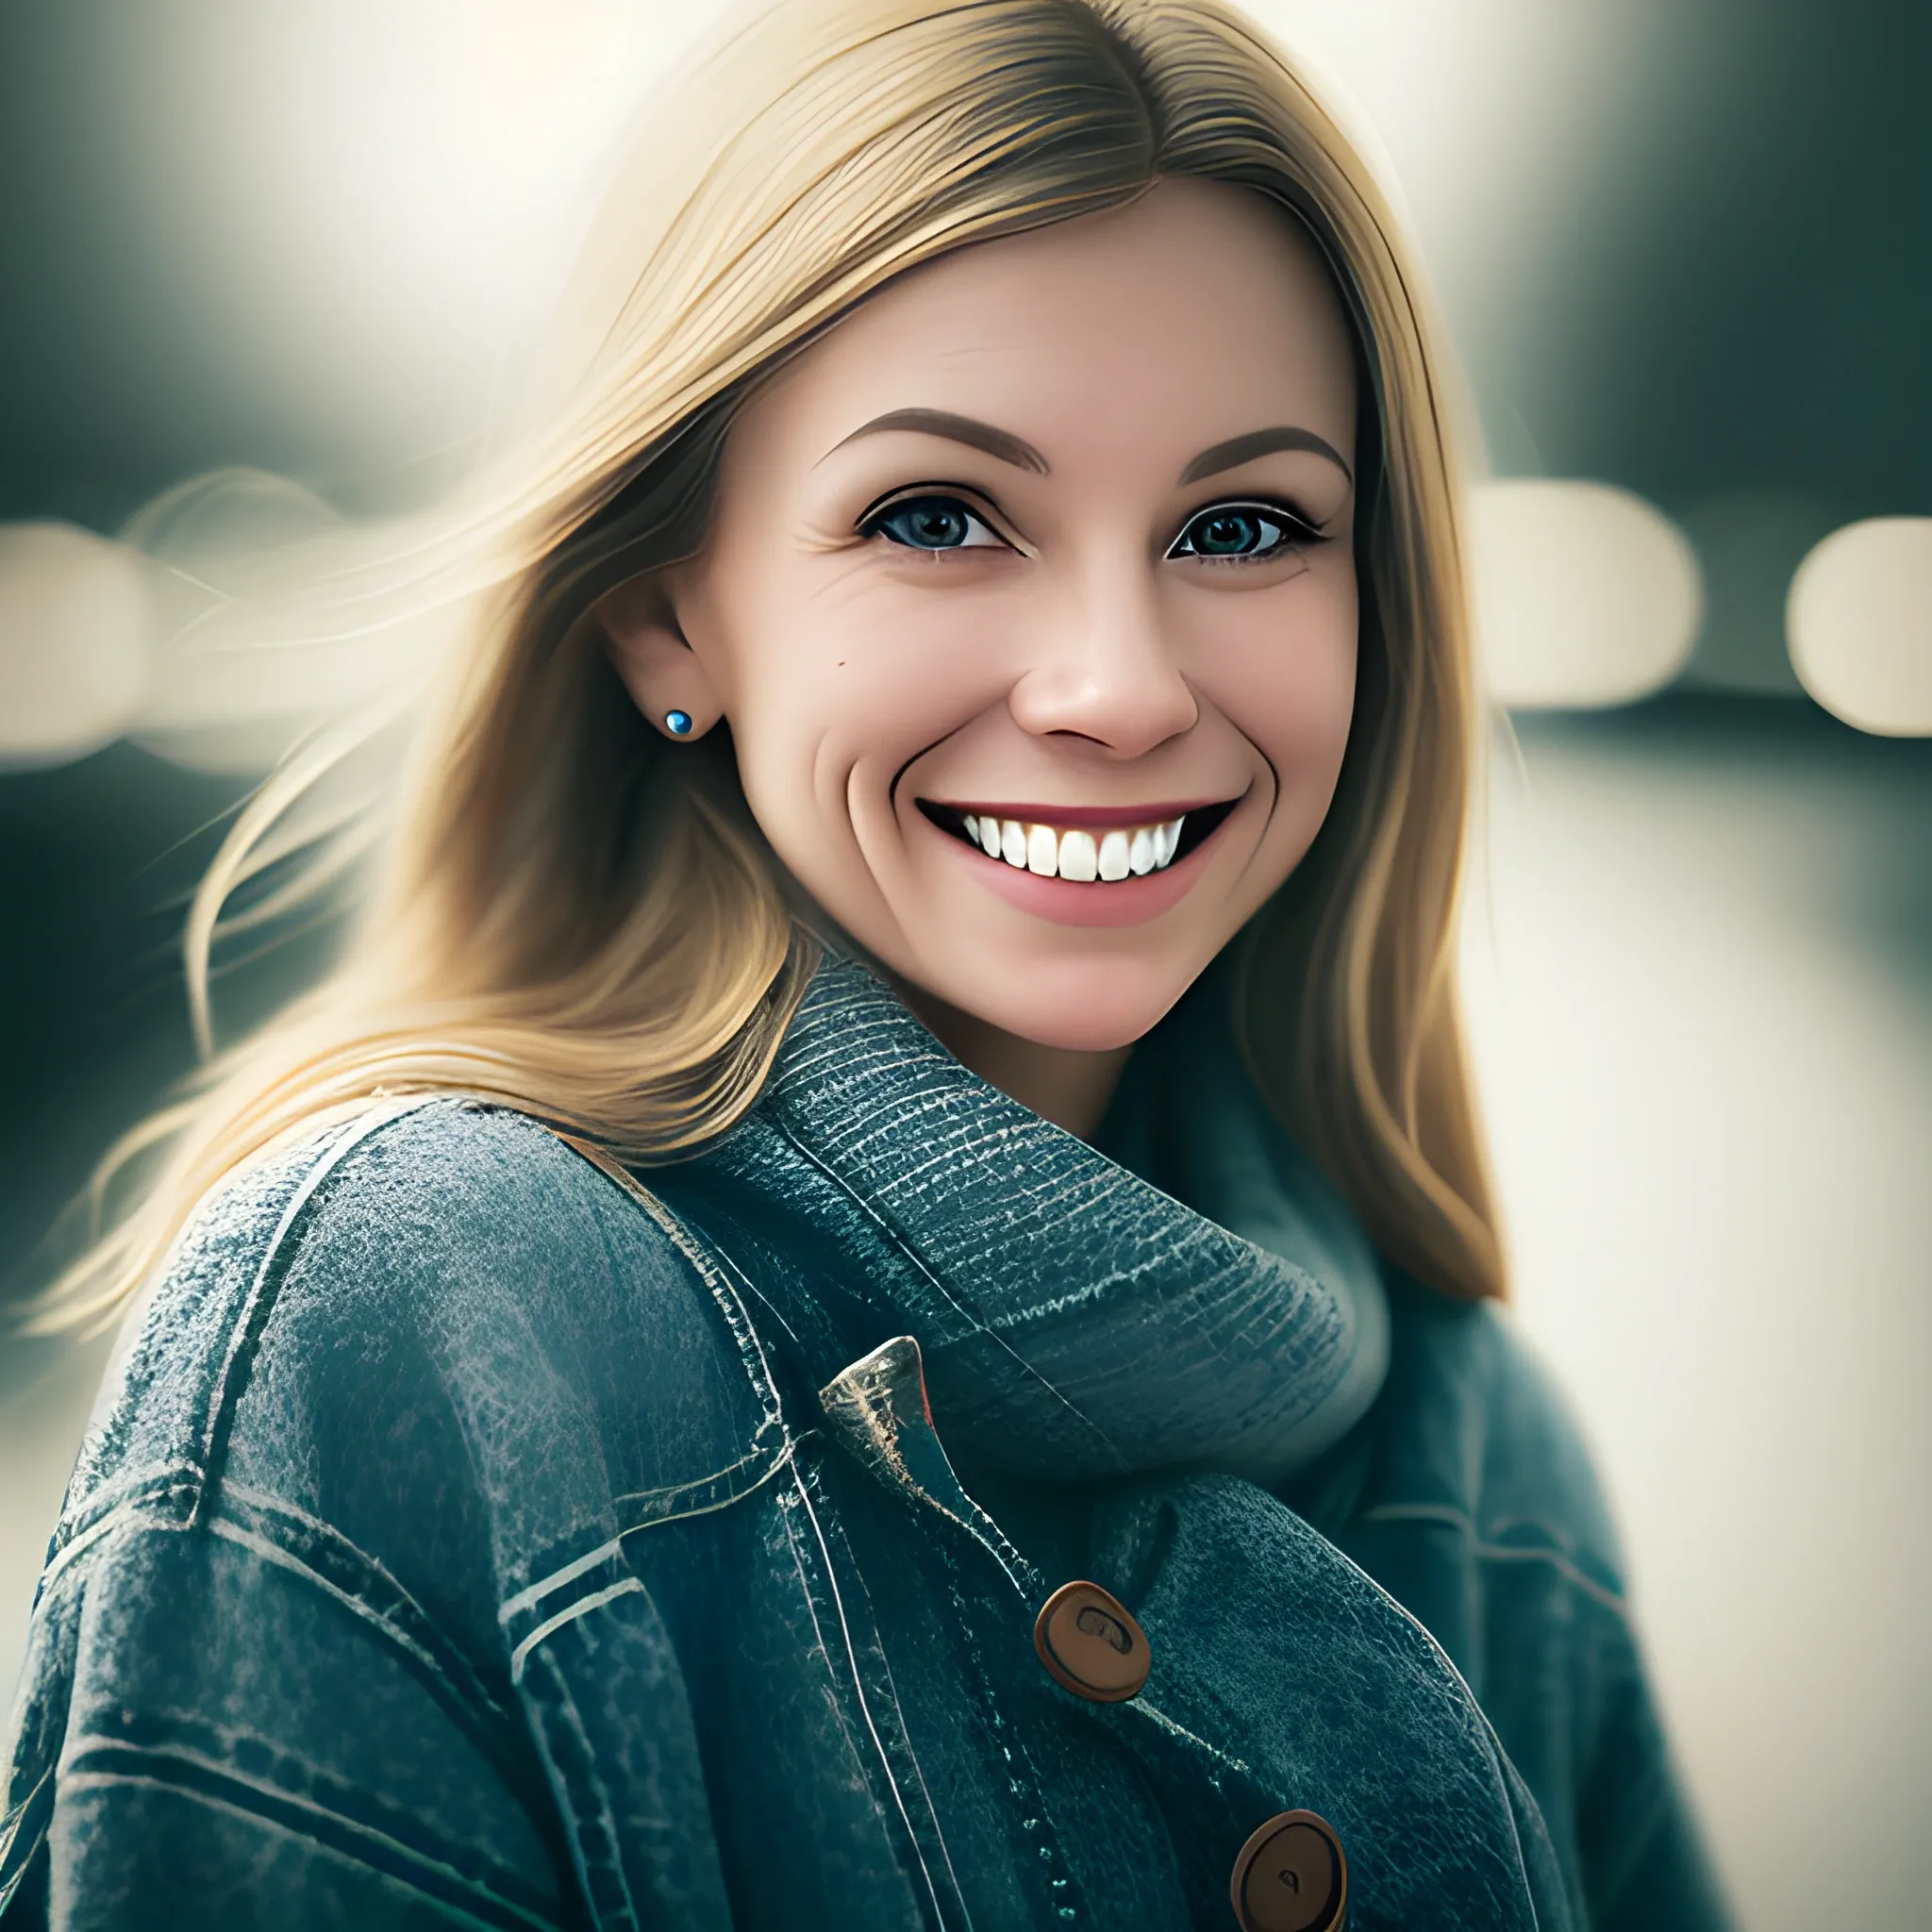 Up close portrait of a smiling dark blond woman with a blurred background. The woman should be looking directly at the camera with a genuine smile on their face. The shot should be framed from shoulders up. Lighting is important, make sure there is good light falling onto the person's face to accentuate the smile and their features. Consider using a shallow depth of field to create a blurred background effect that emphasizes the subject. The overall look should be warm and inviting, reflecting the person's positive testimonial.